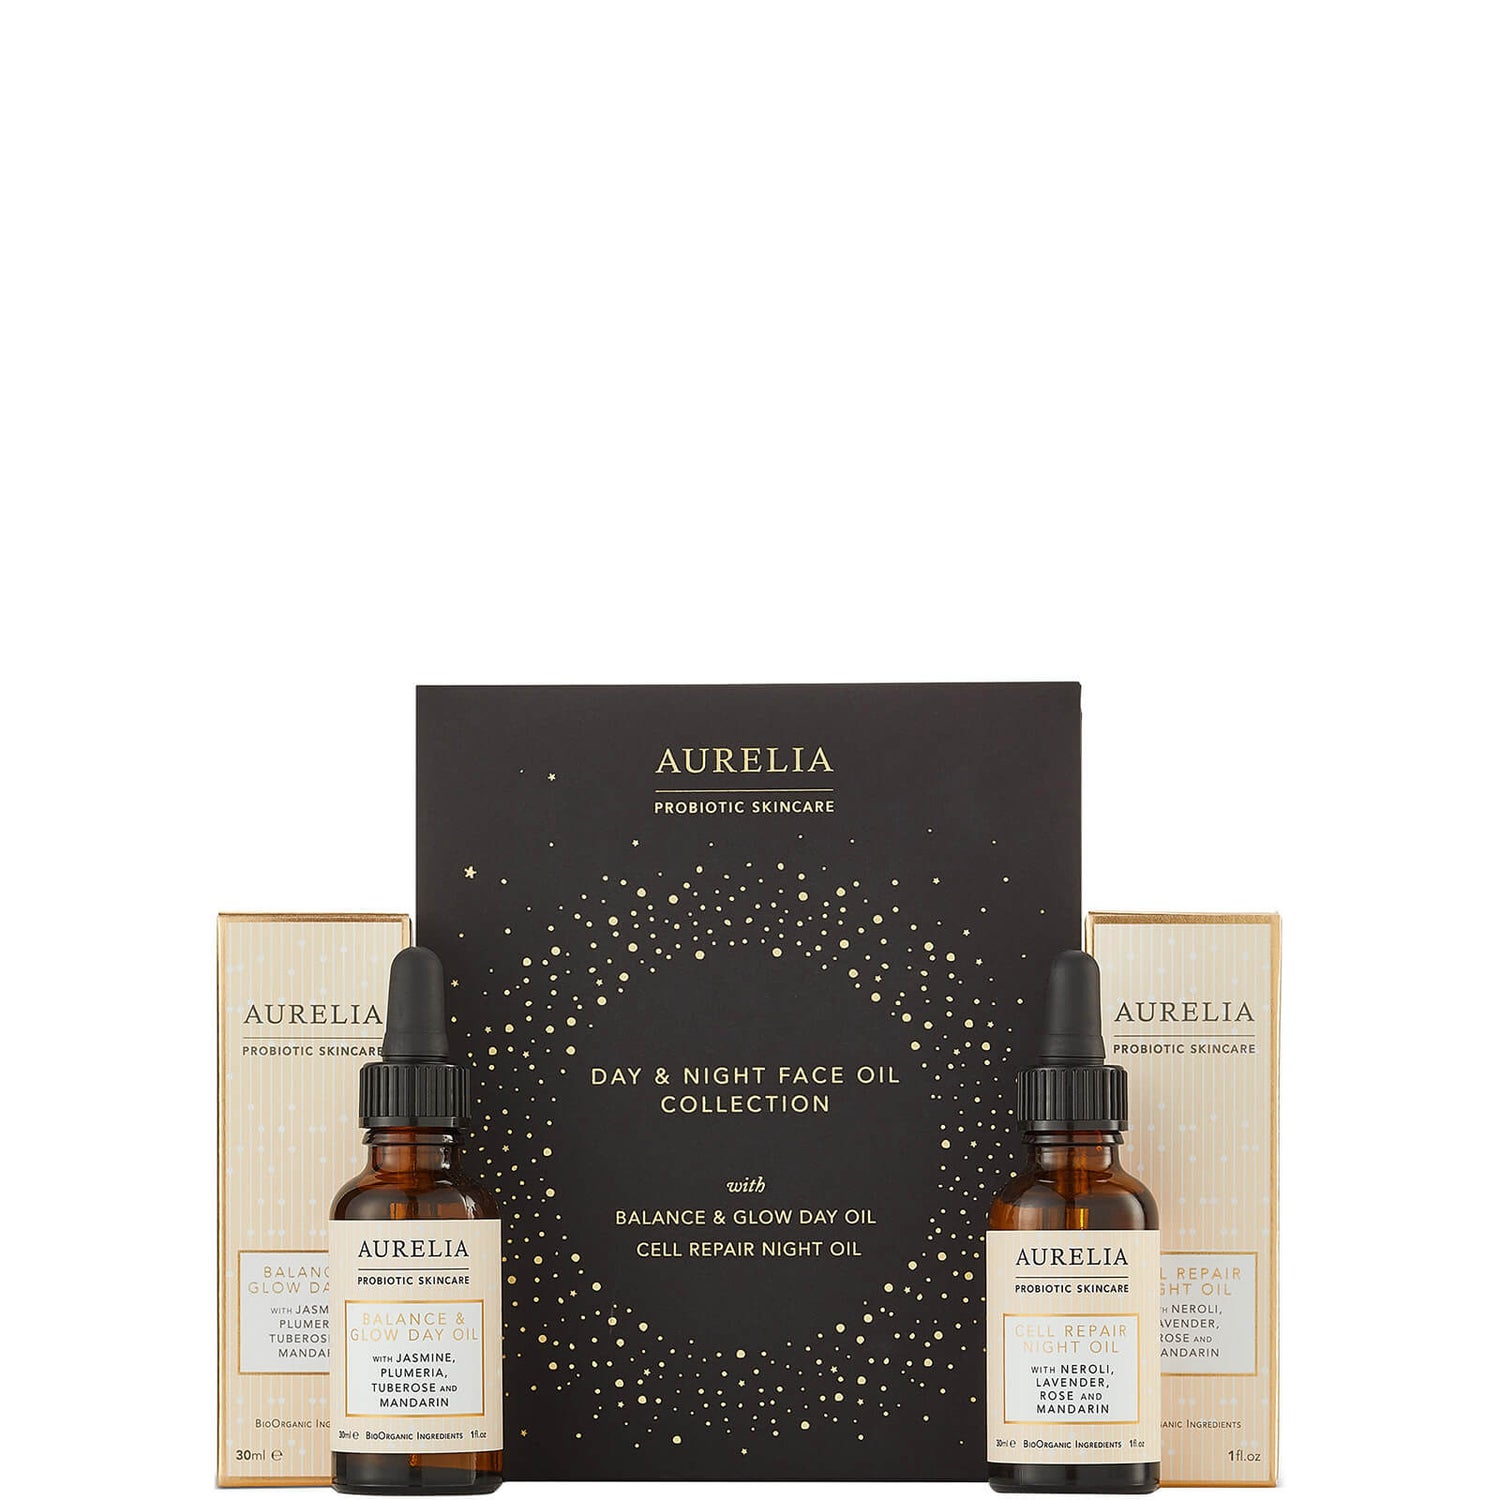 Aurelia Probiotic Skincare Day and Night Oil Collection 60ml (Worth $100)